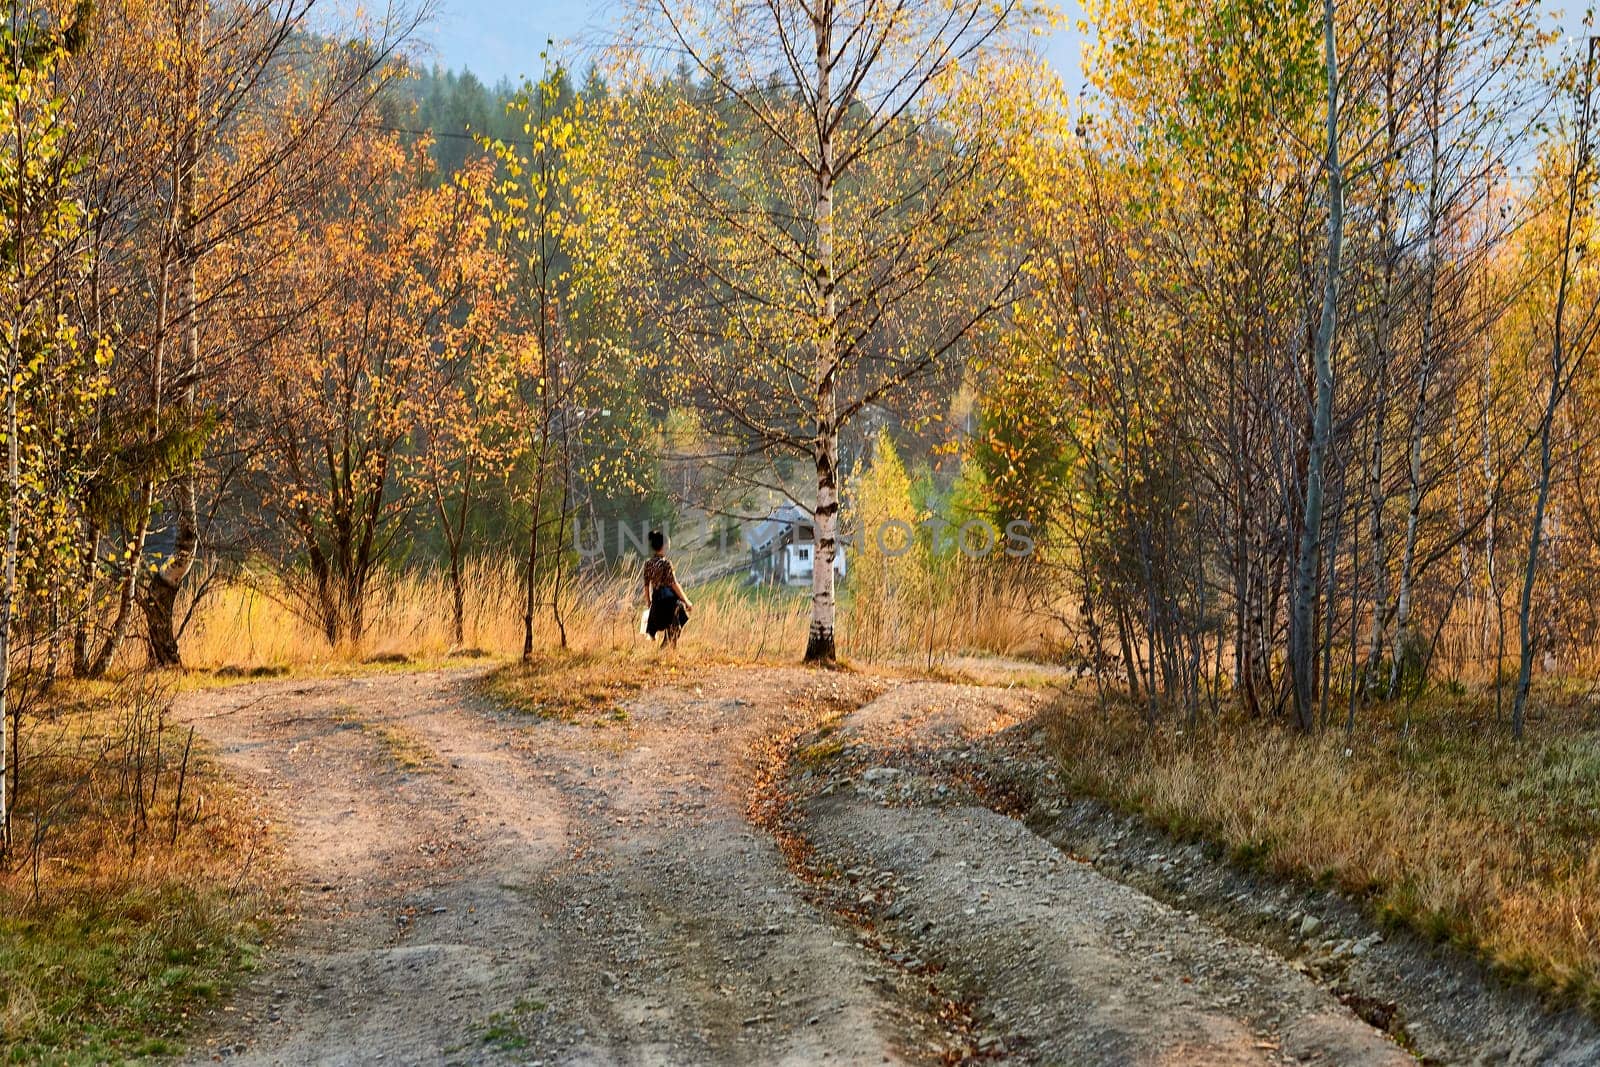 A girl hiking walks a dirt road in the mountains in haze on a golden autumn day by jovani68